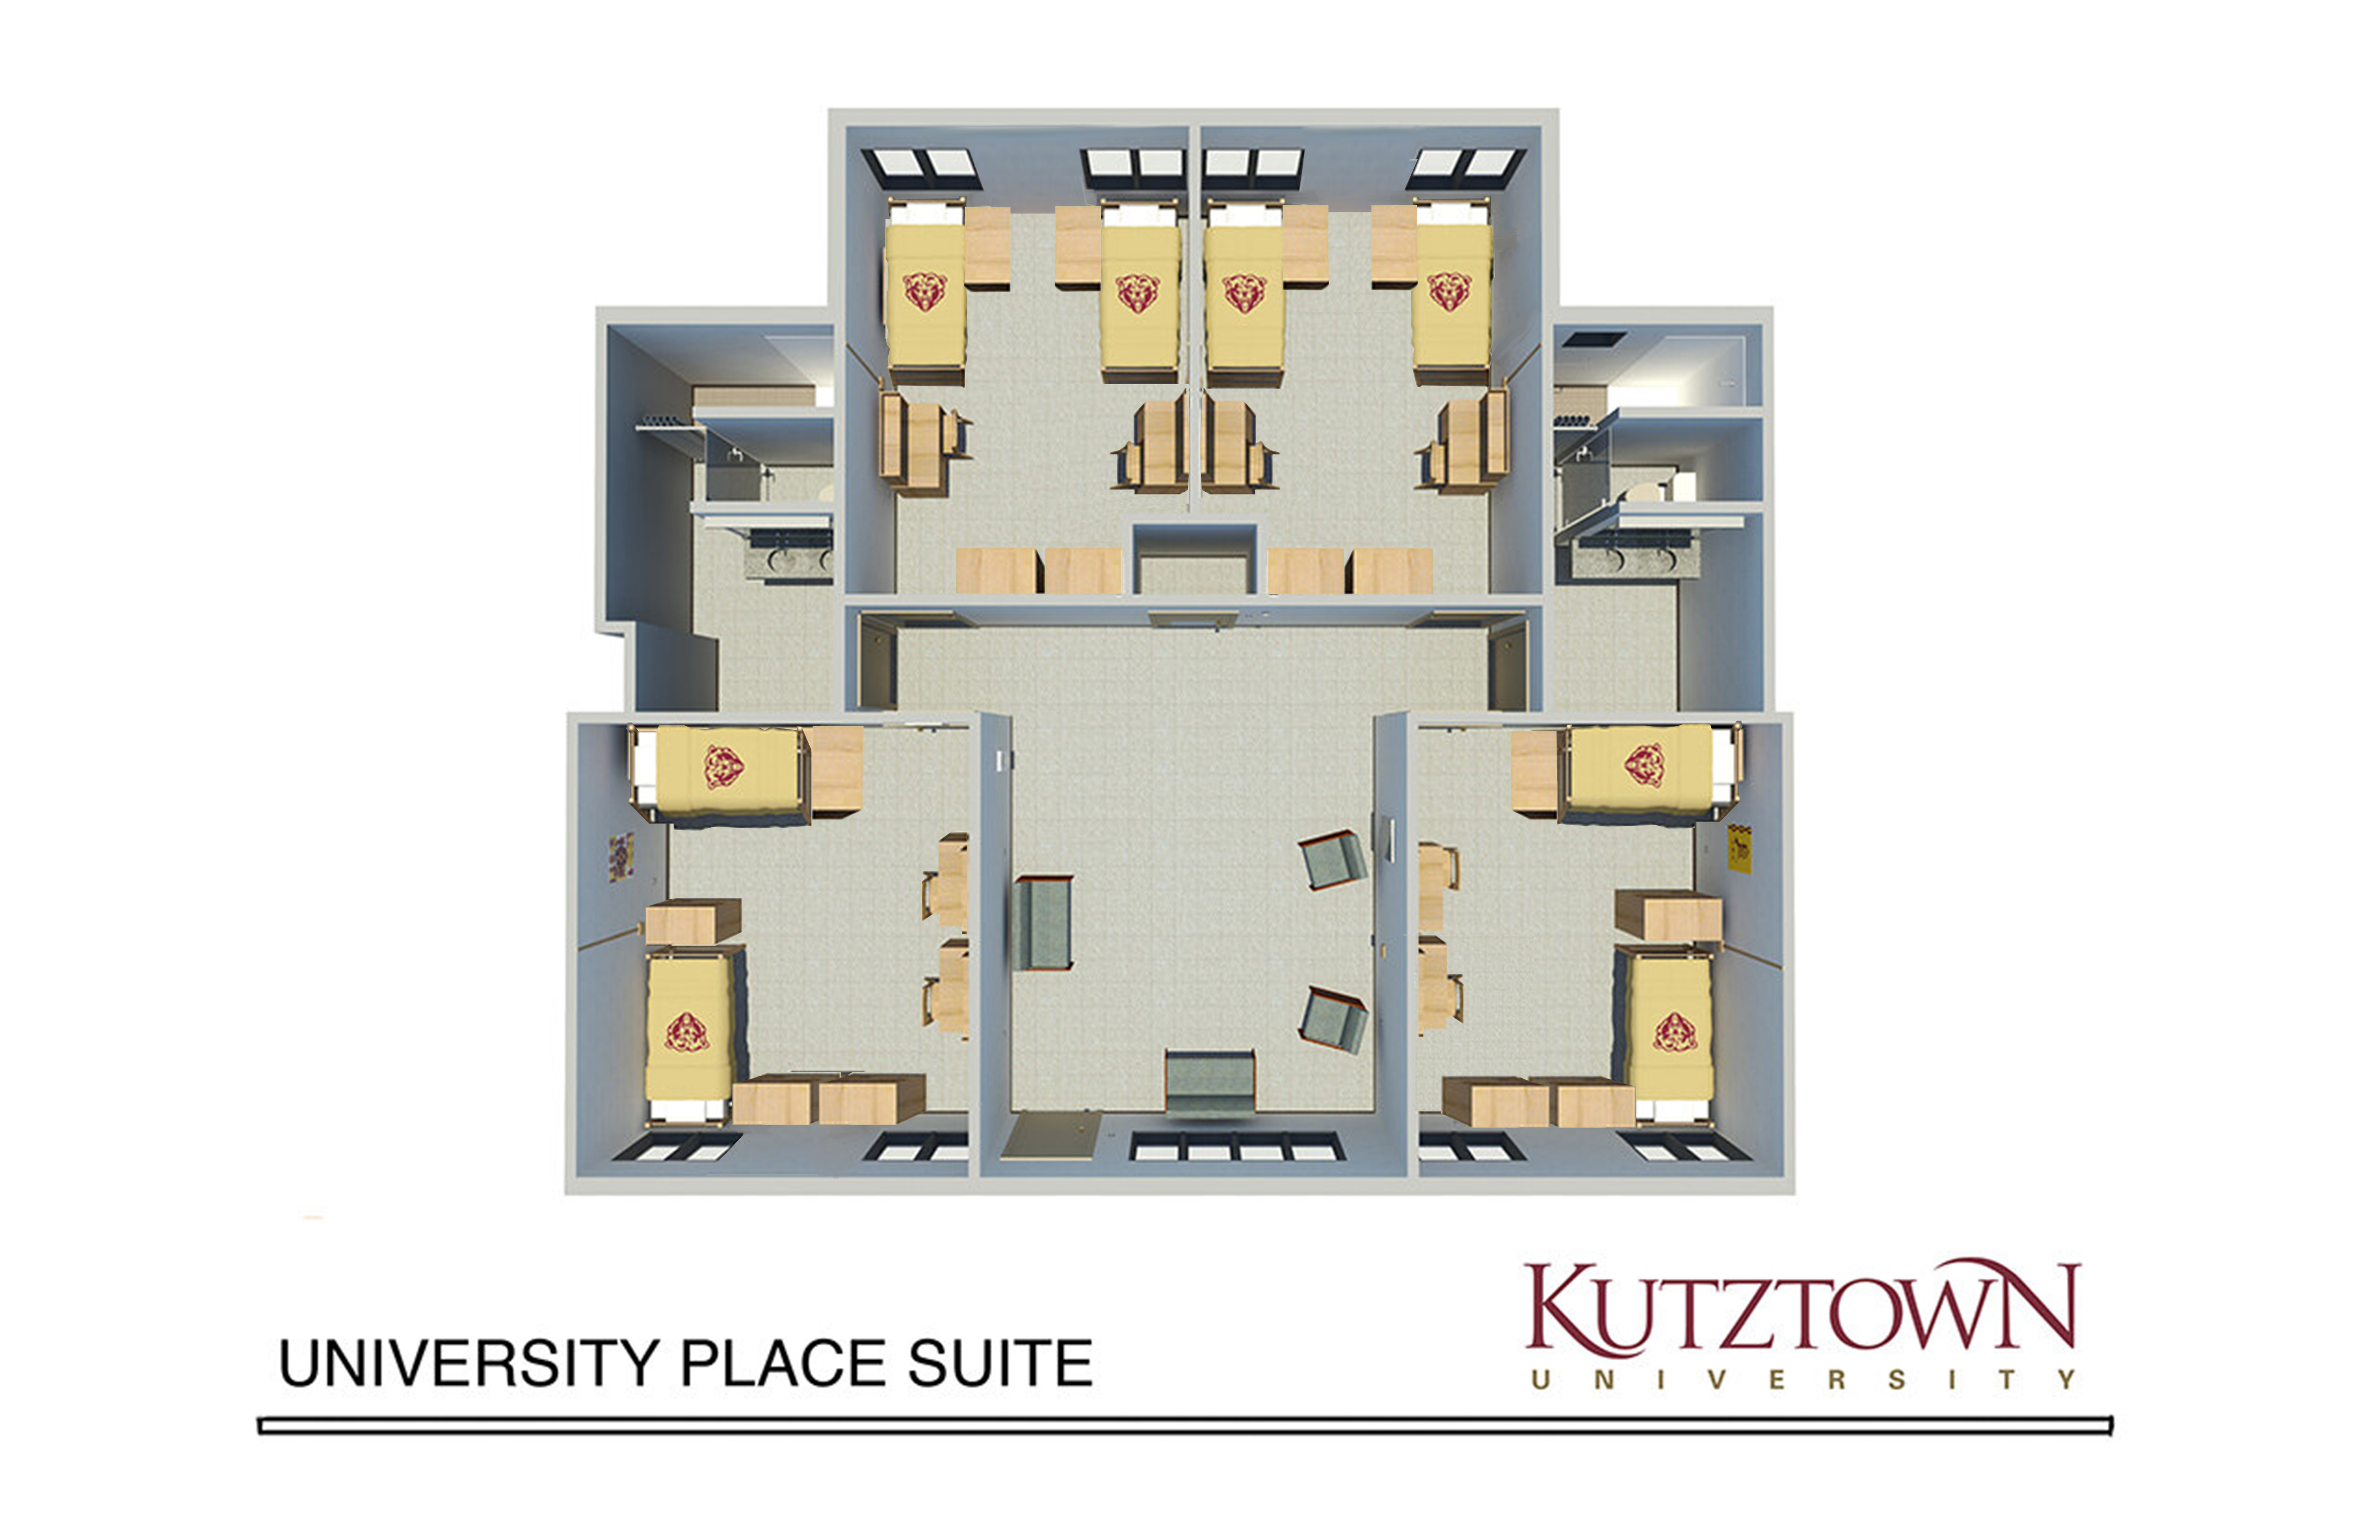 floor plan of university place, showing 4 double bedrooms surrounding a middle common area, and two full bathrooms on each side of the suite